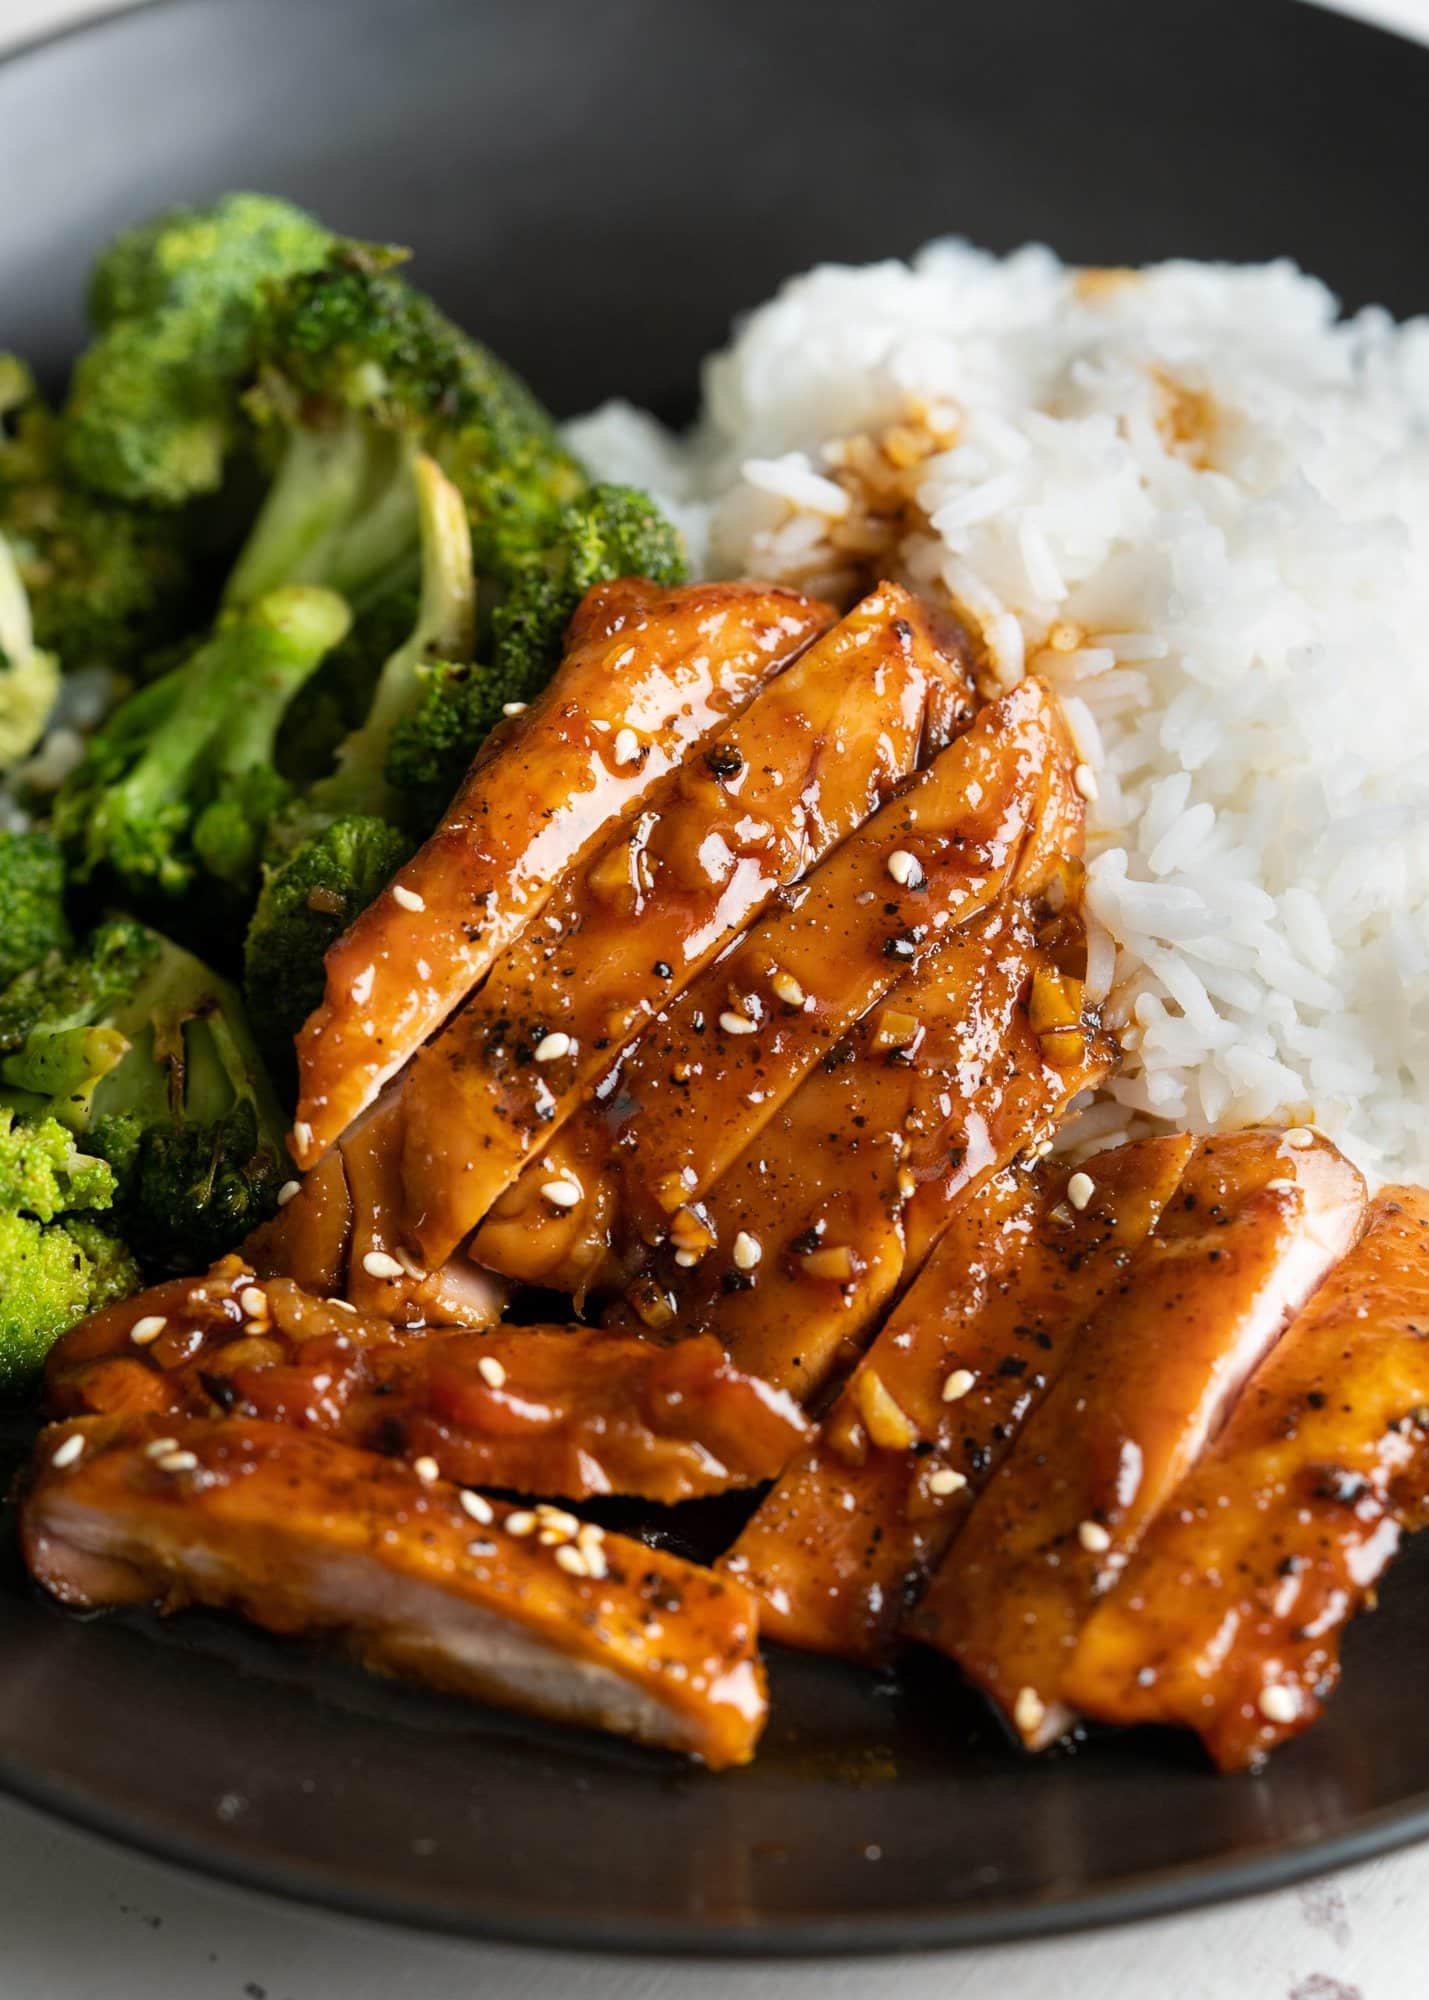 Sliced chicken coated with honey garlic sauce and served with rice and broccoli on a black plate.